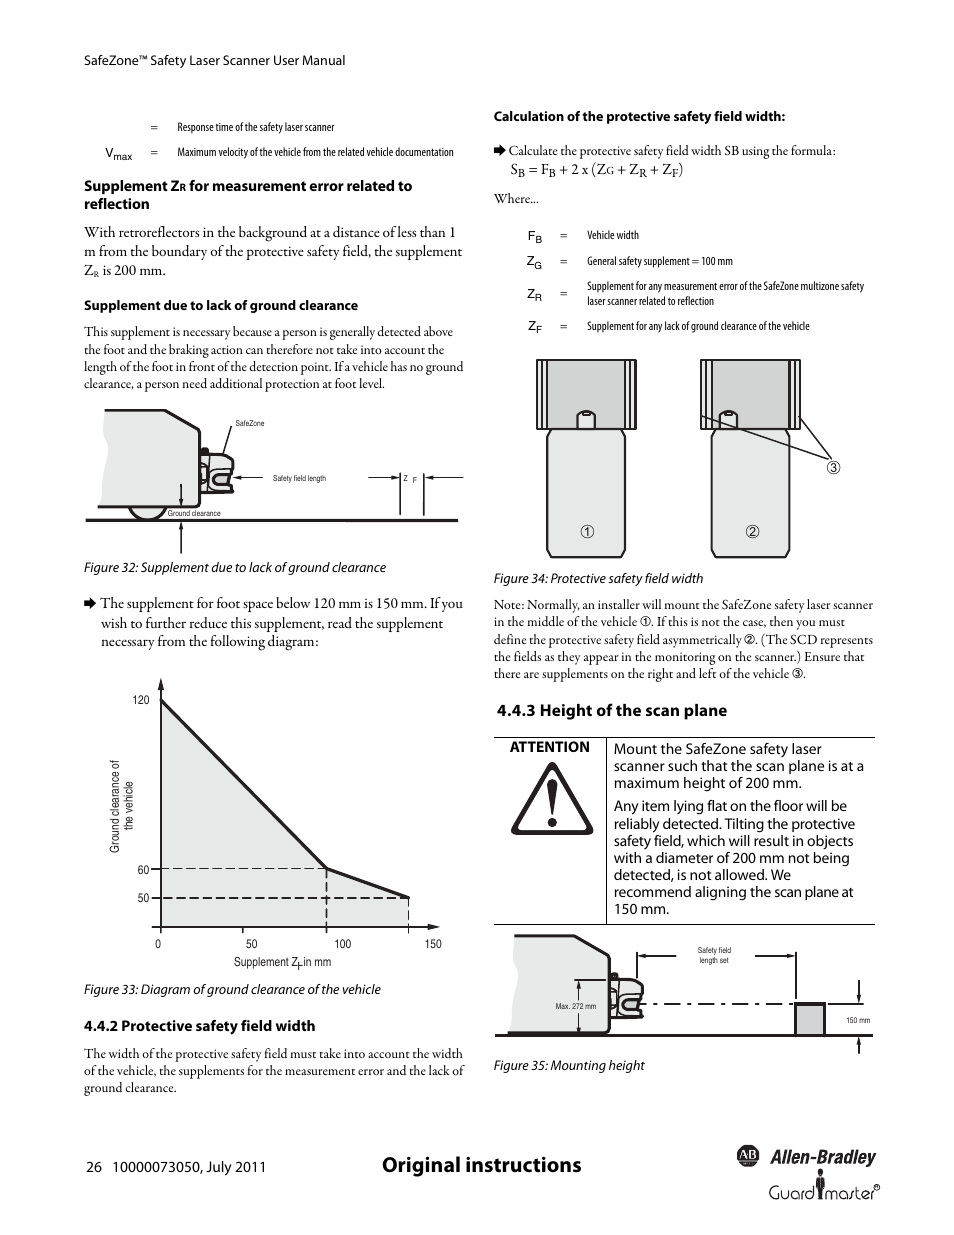 Original instructions, 3 height of the scan plane | Rockwell Automation 442L SafeZone Singlezone & Multizone Safety Laser Scanner User Manual | Page 28 / 60